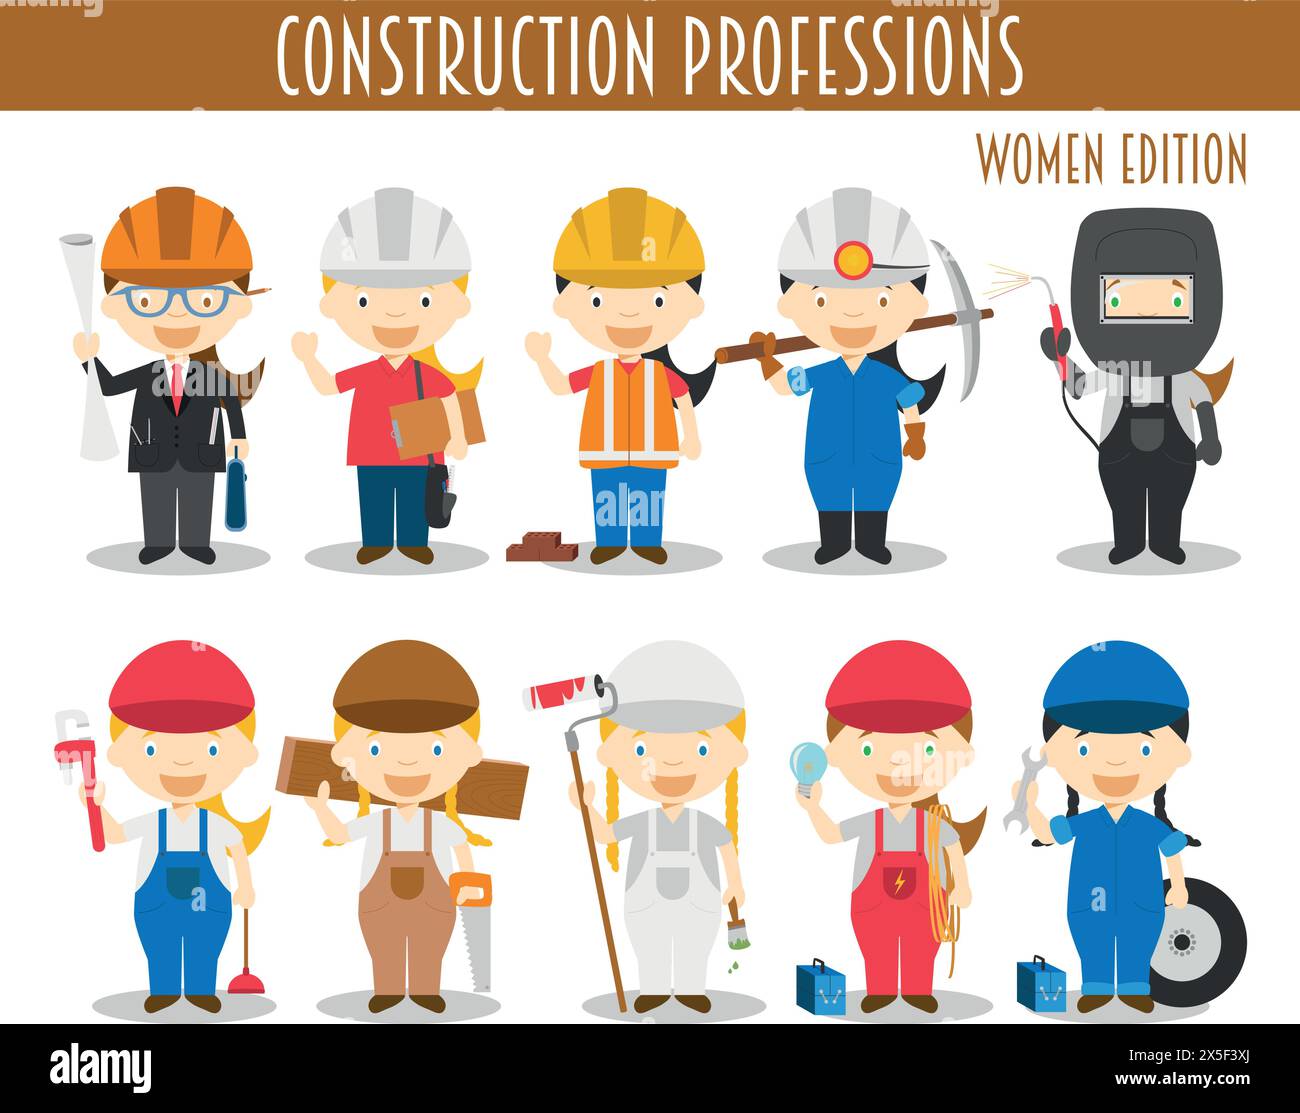 Vector Set of Construction Professions in cartoon style. Women Edition. Stock Vector